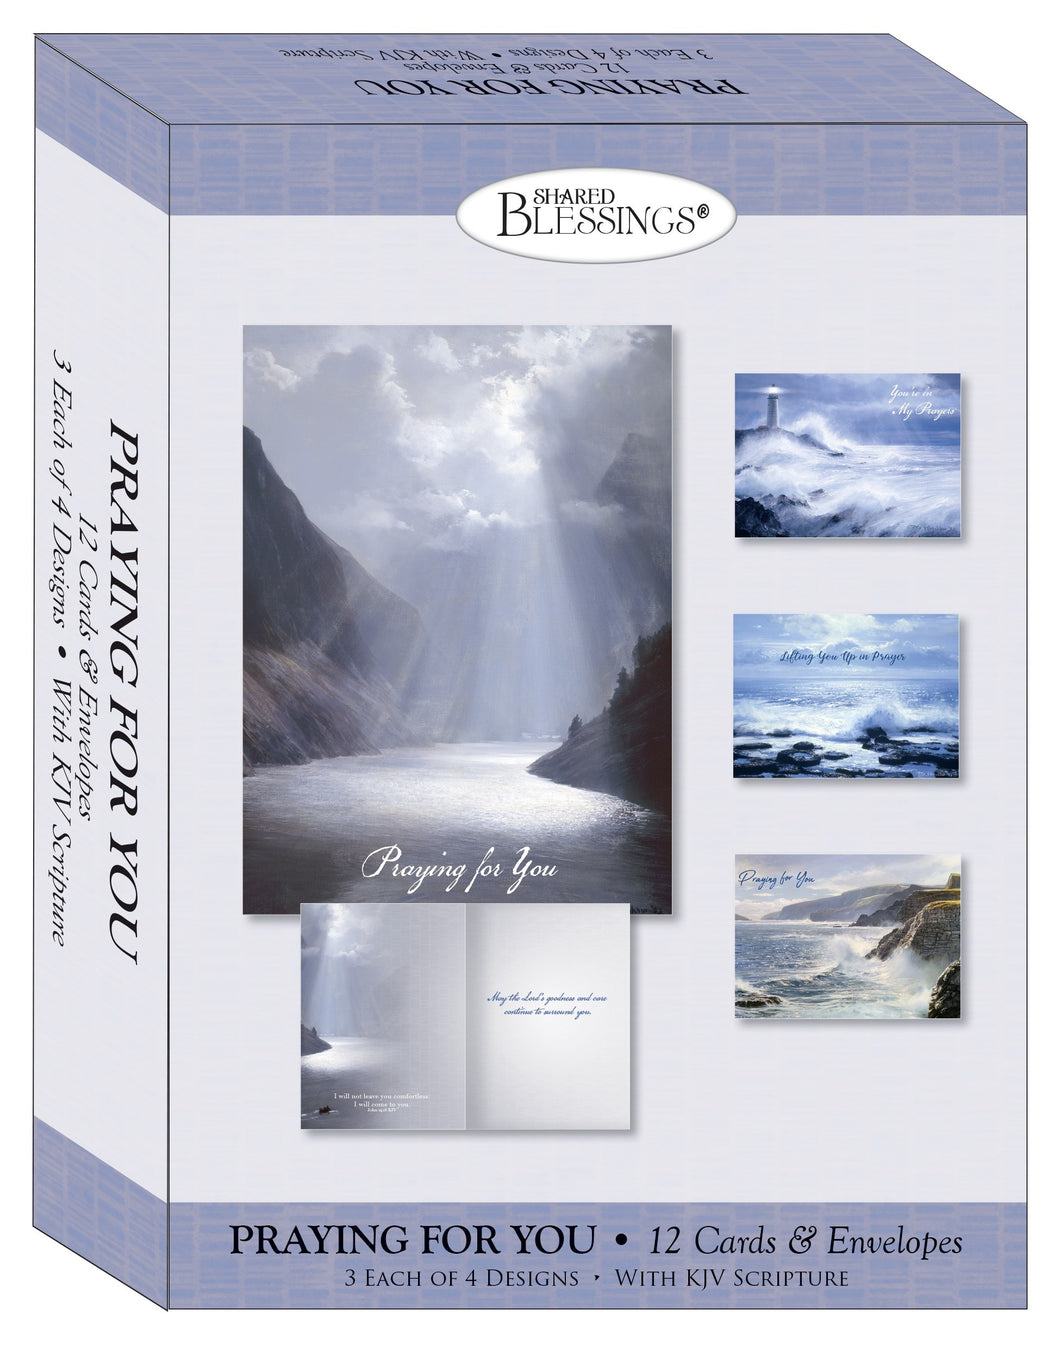 Card-Boxed-Shared Blessings-Praying For You-Life's Journeys (Box Of 12)